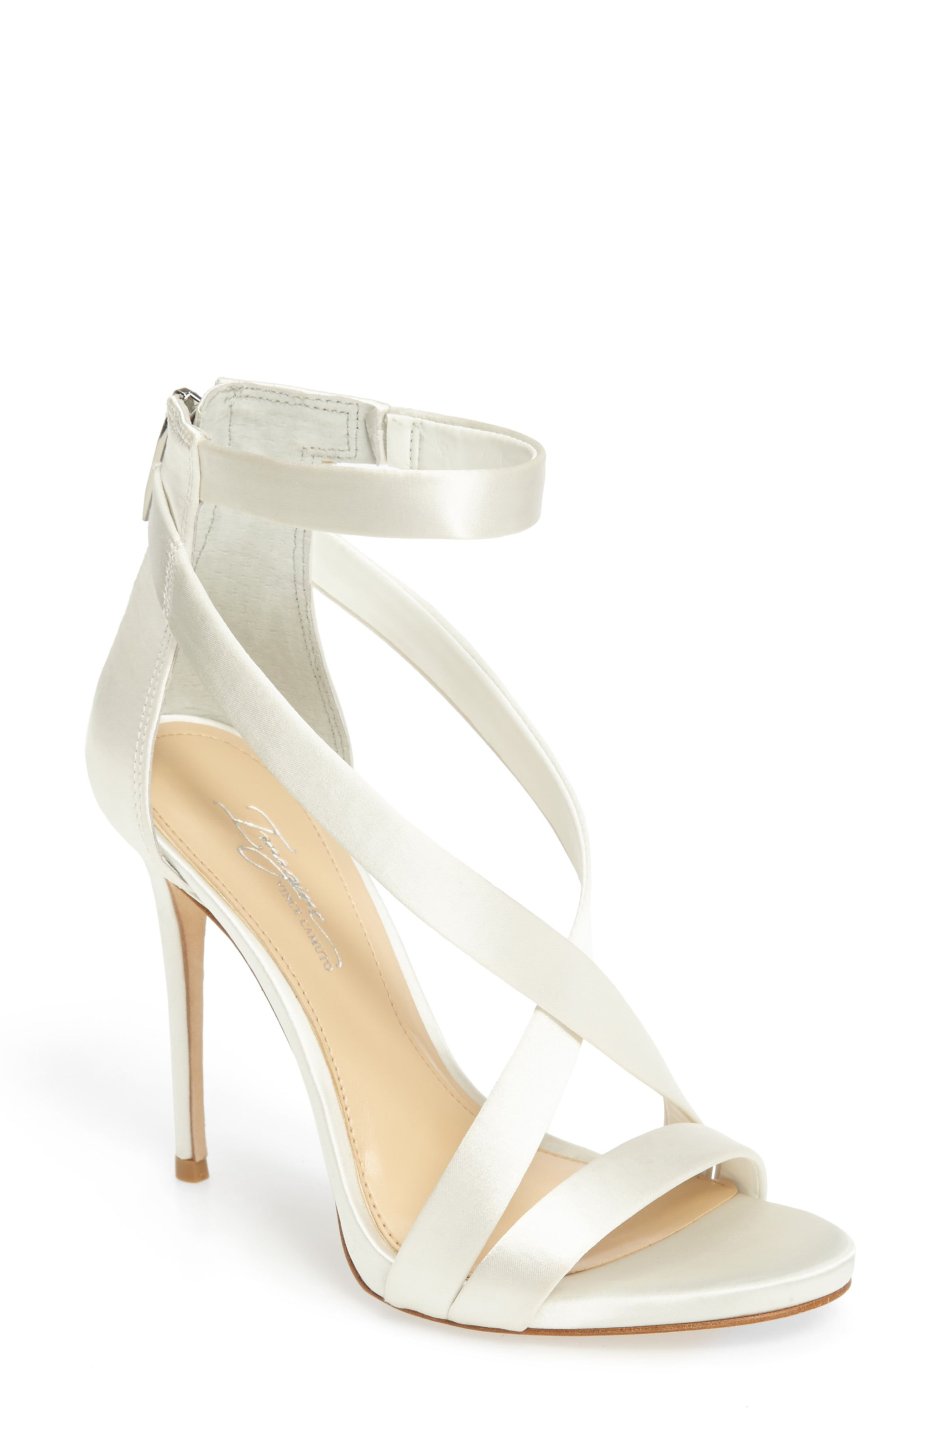 Vince Camuto White Shoes